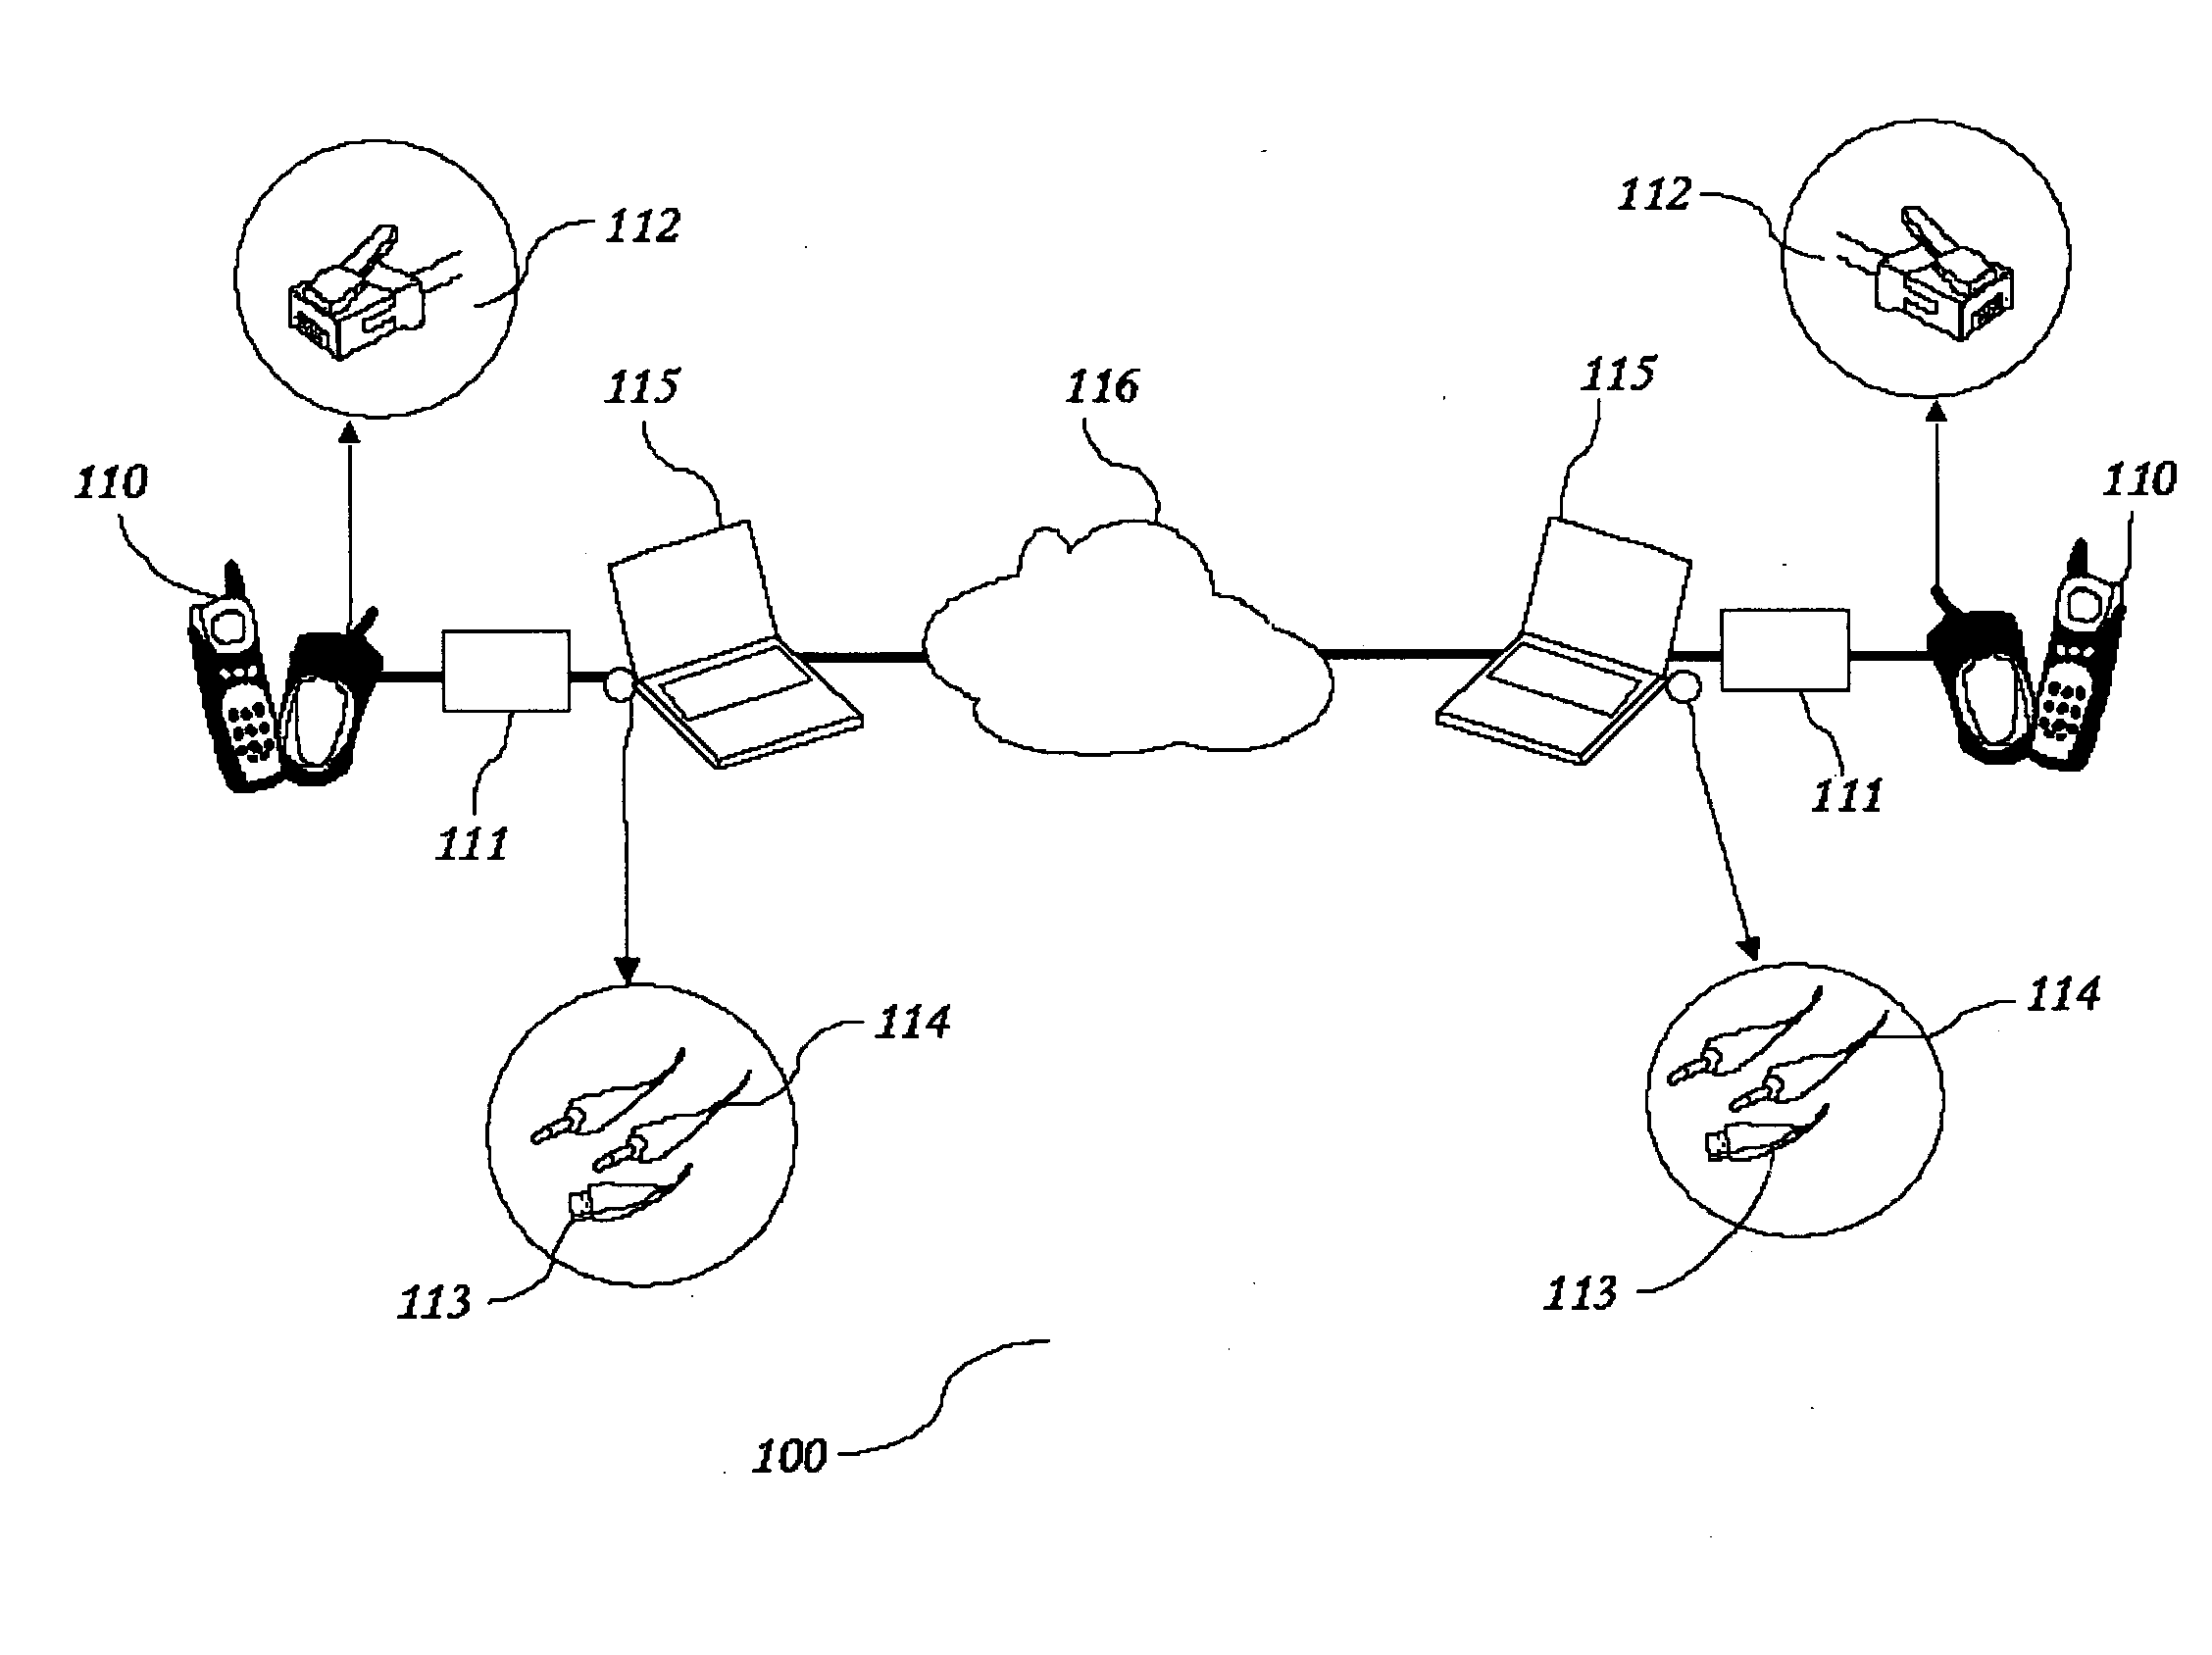 Internet VoIP chat cord apparatus